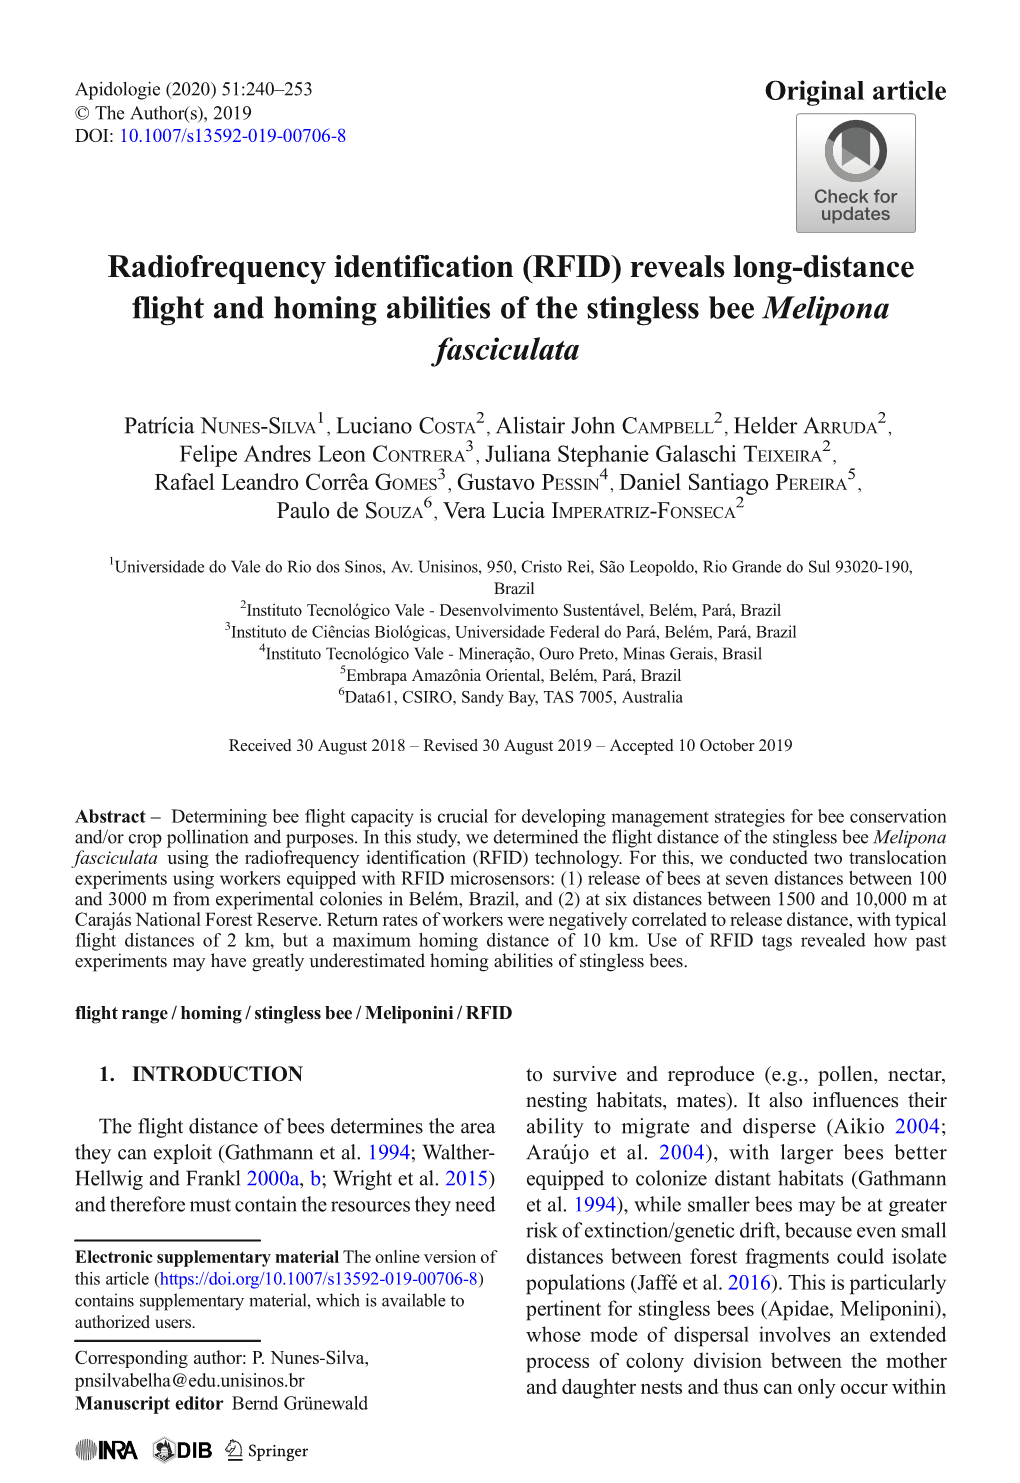 Radiofrequency Identification (RFID) Reveals Long-Distance Flight and Homing Abilities of the Stingless Bee Melipona Fasciculata